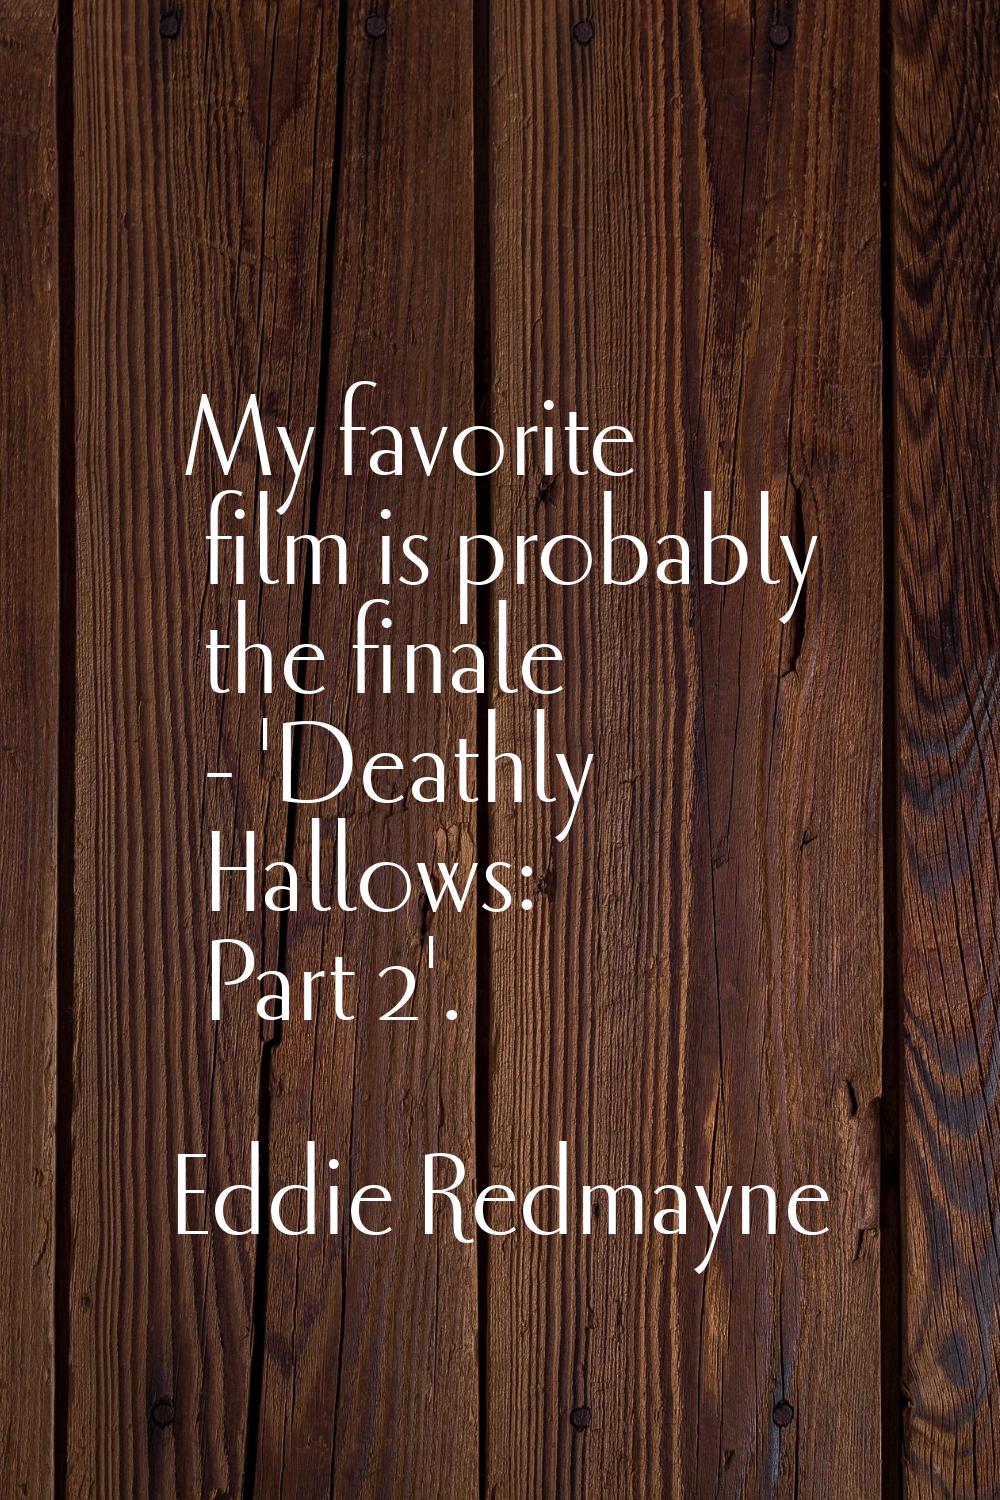 My favorite film is probably the finale - 'Deathly Hallows: Part 2'.